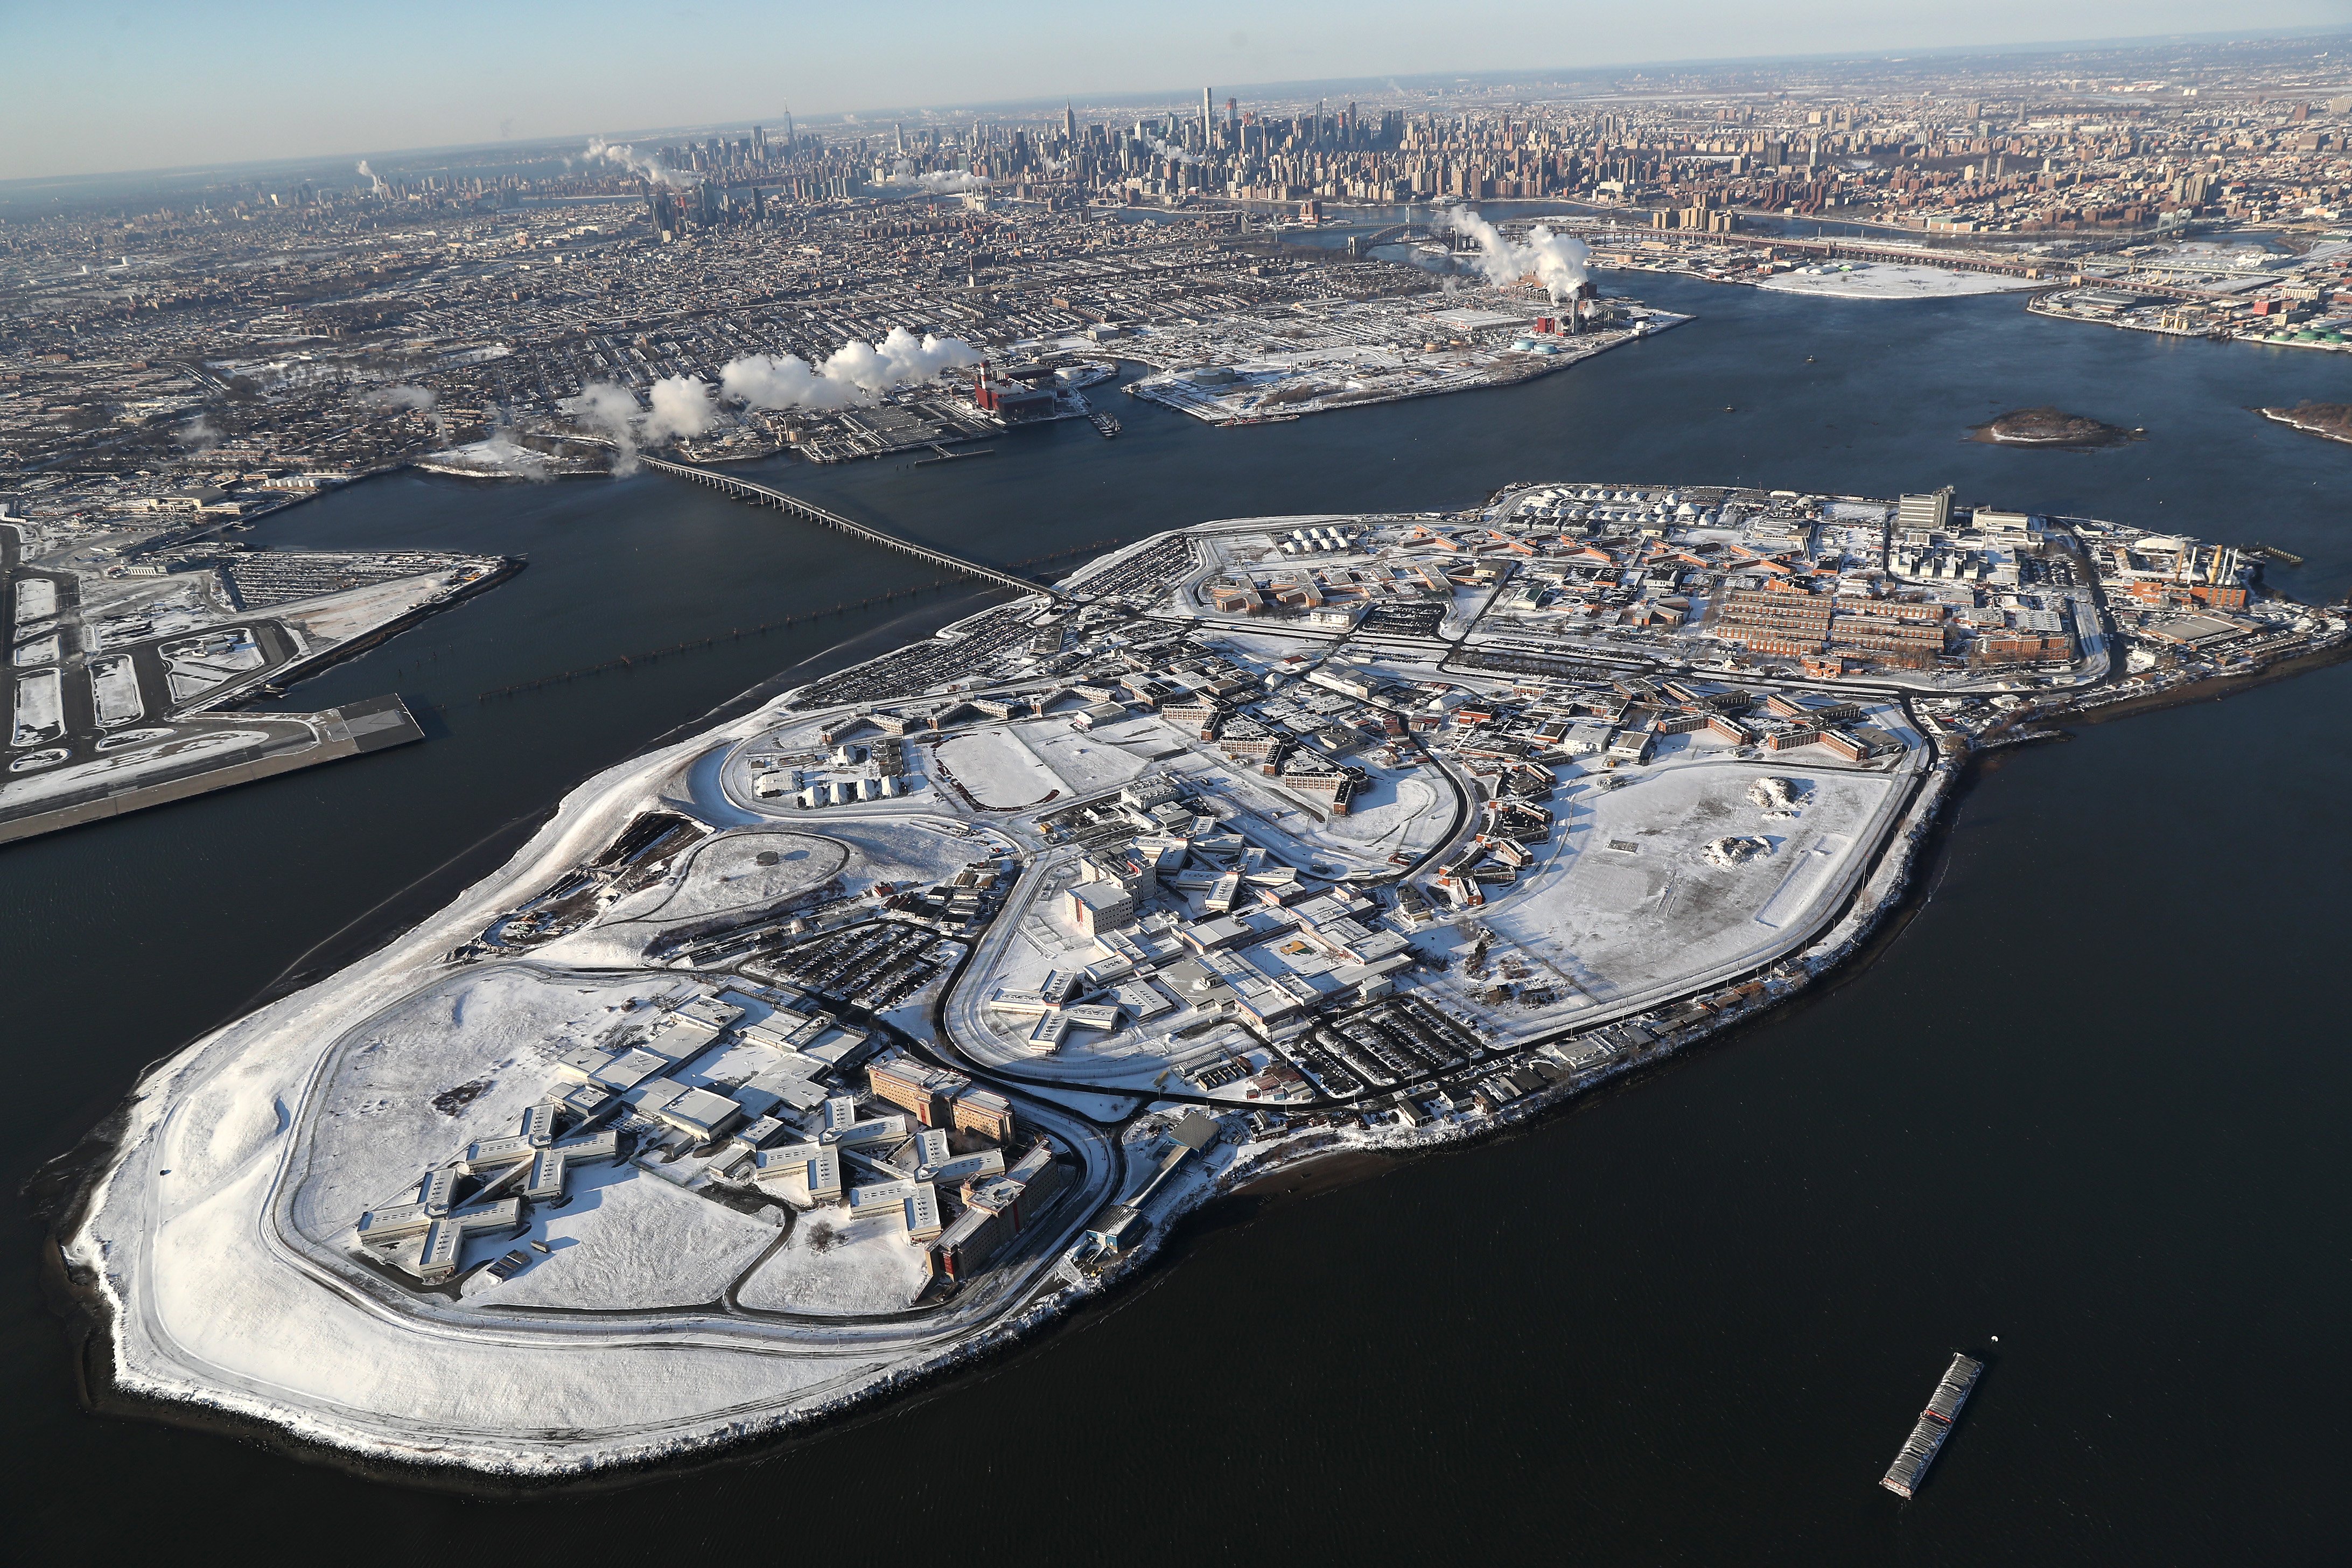 Rikers Island jail complex stands under a blanket of snow on January 5, 2018 in the Bronx borough of New York City. Under frigid temperatures, New York City dug out from the "Bomb Cyclone." (Photo by John Moore/Getty Images)